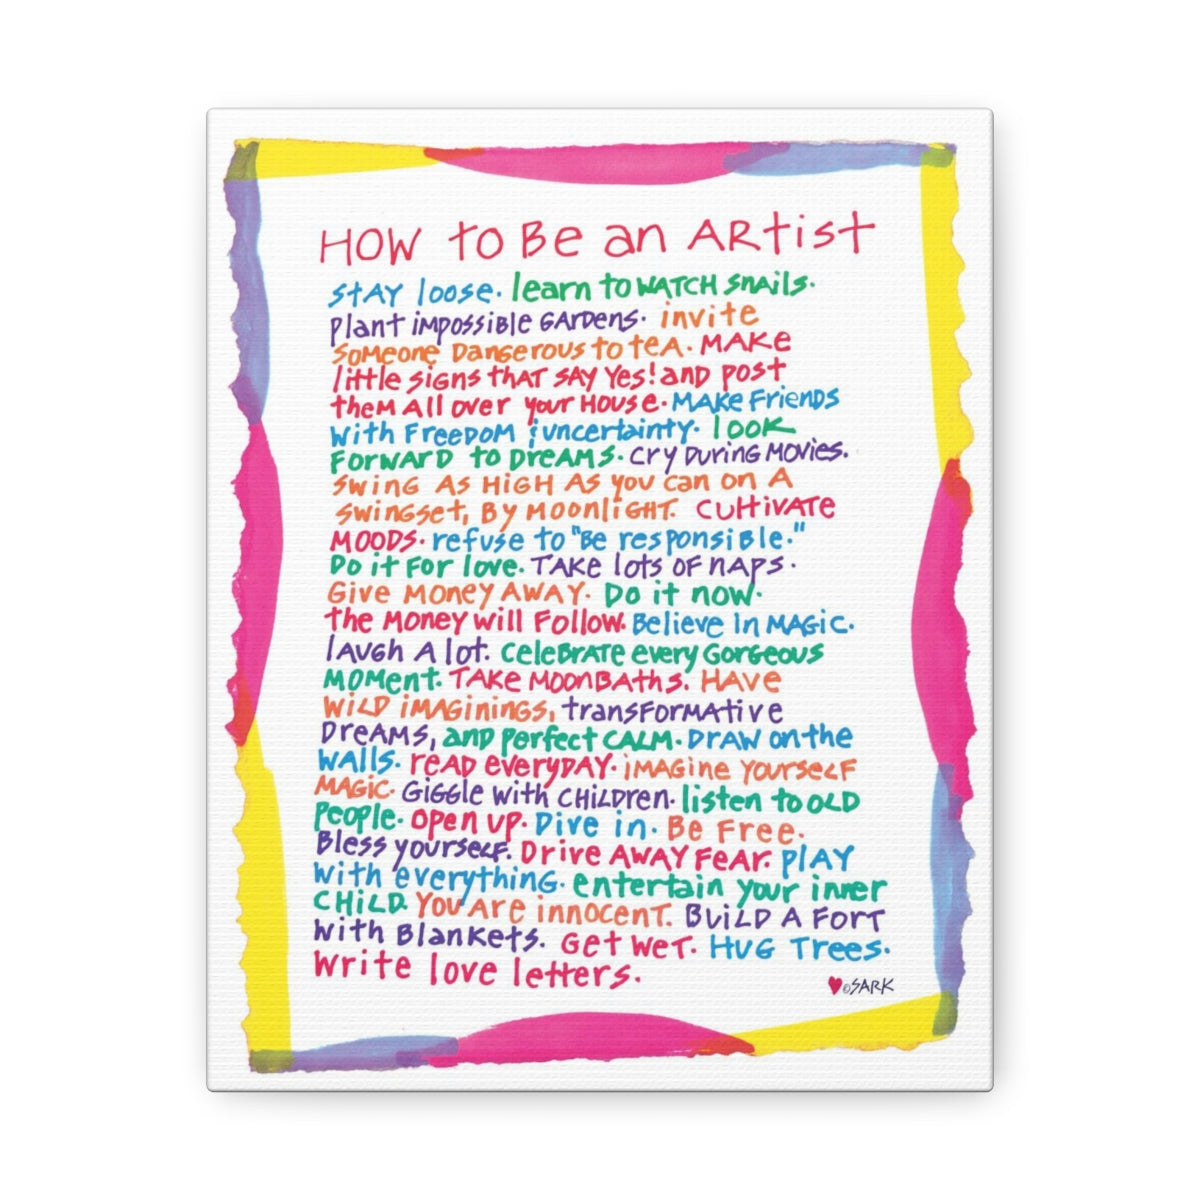 How To Be An Artist - Canvas Gallery Wraps